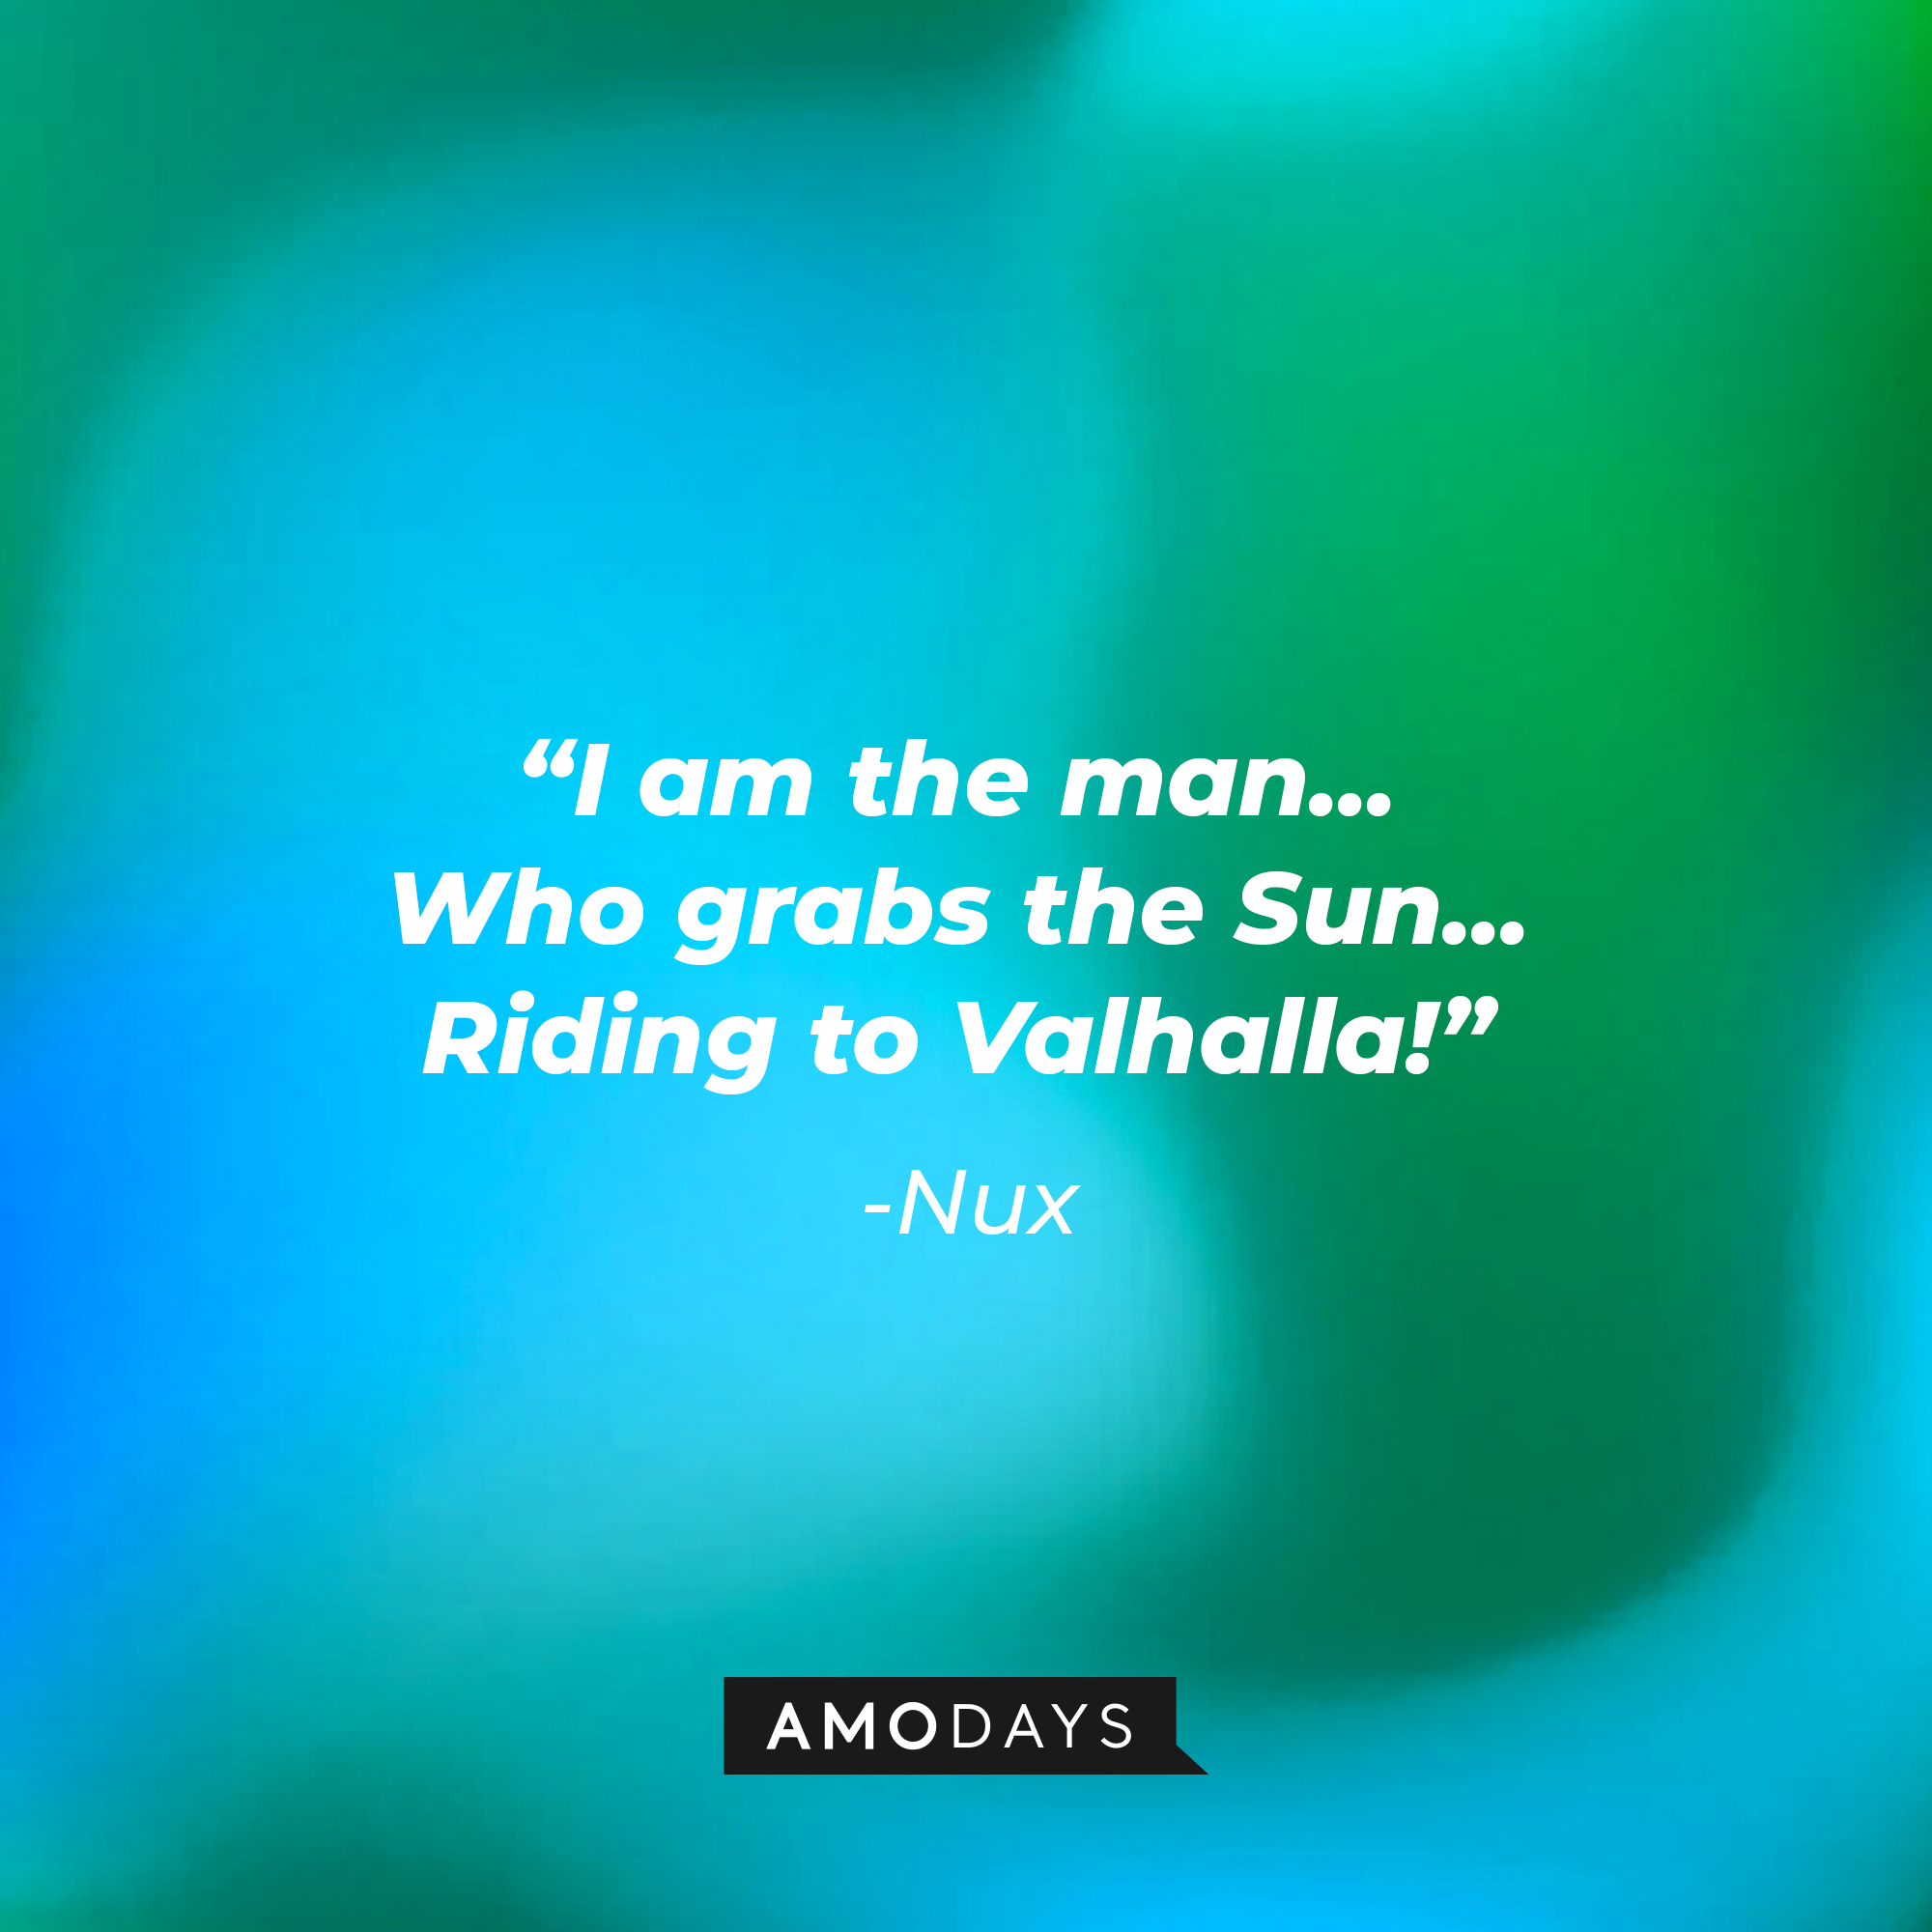 Nux’s quote: “I am the man... Who grabs the Sun... Riding to Valhalla!” | Source: AmoDays